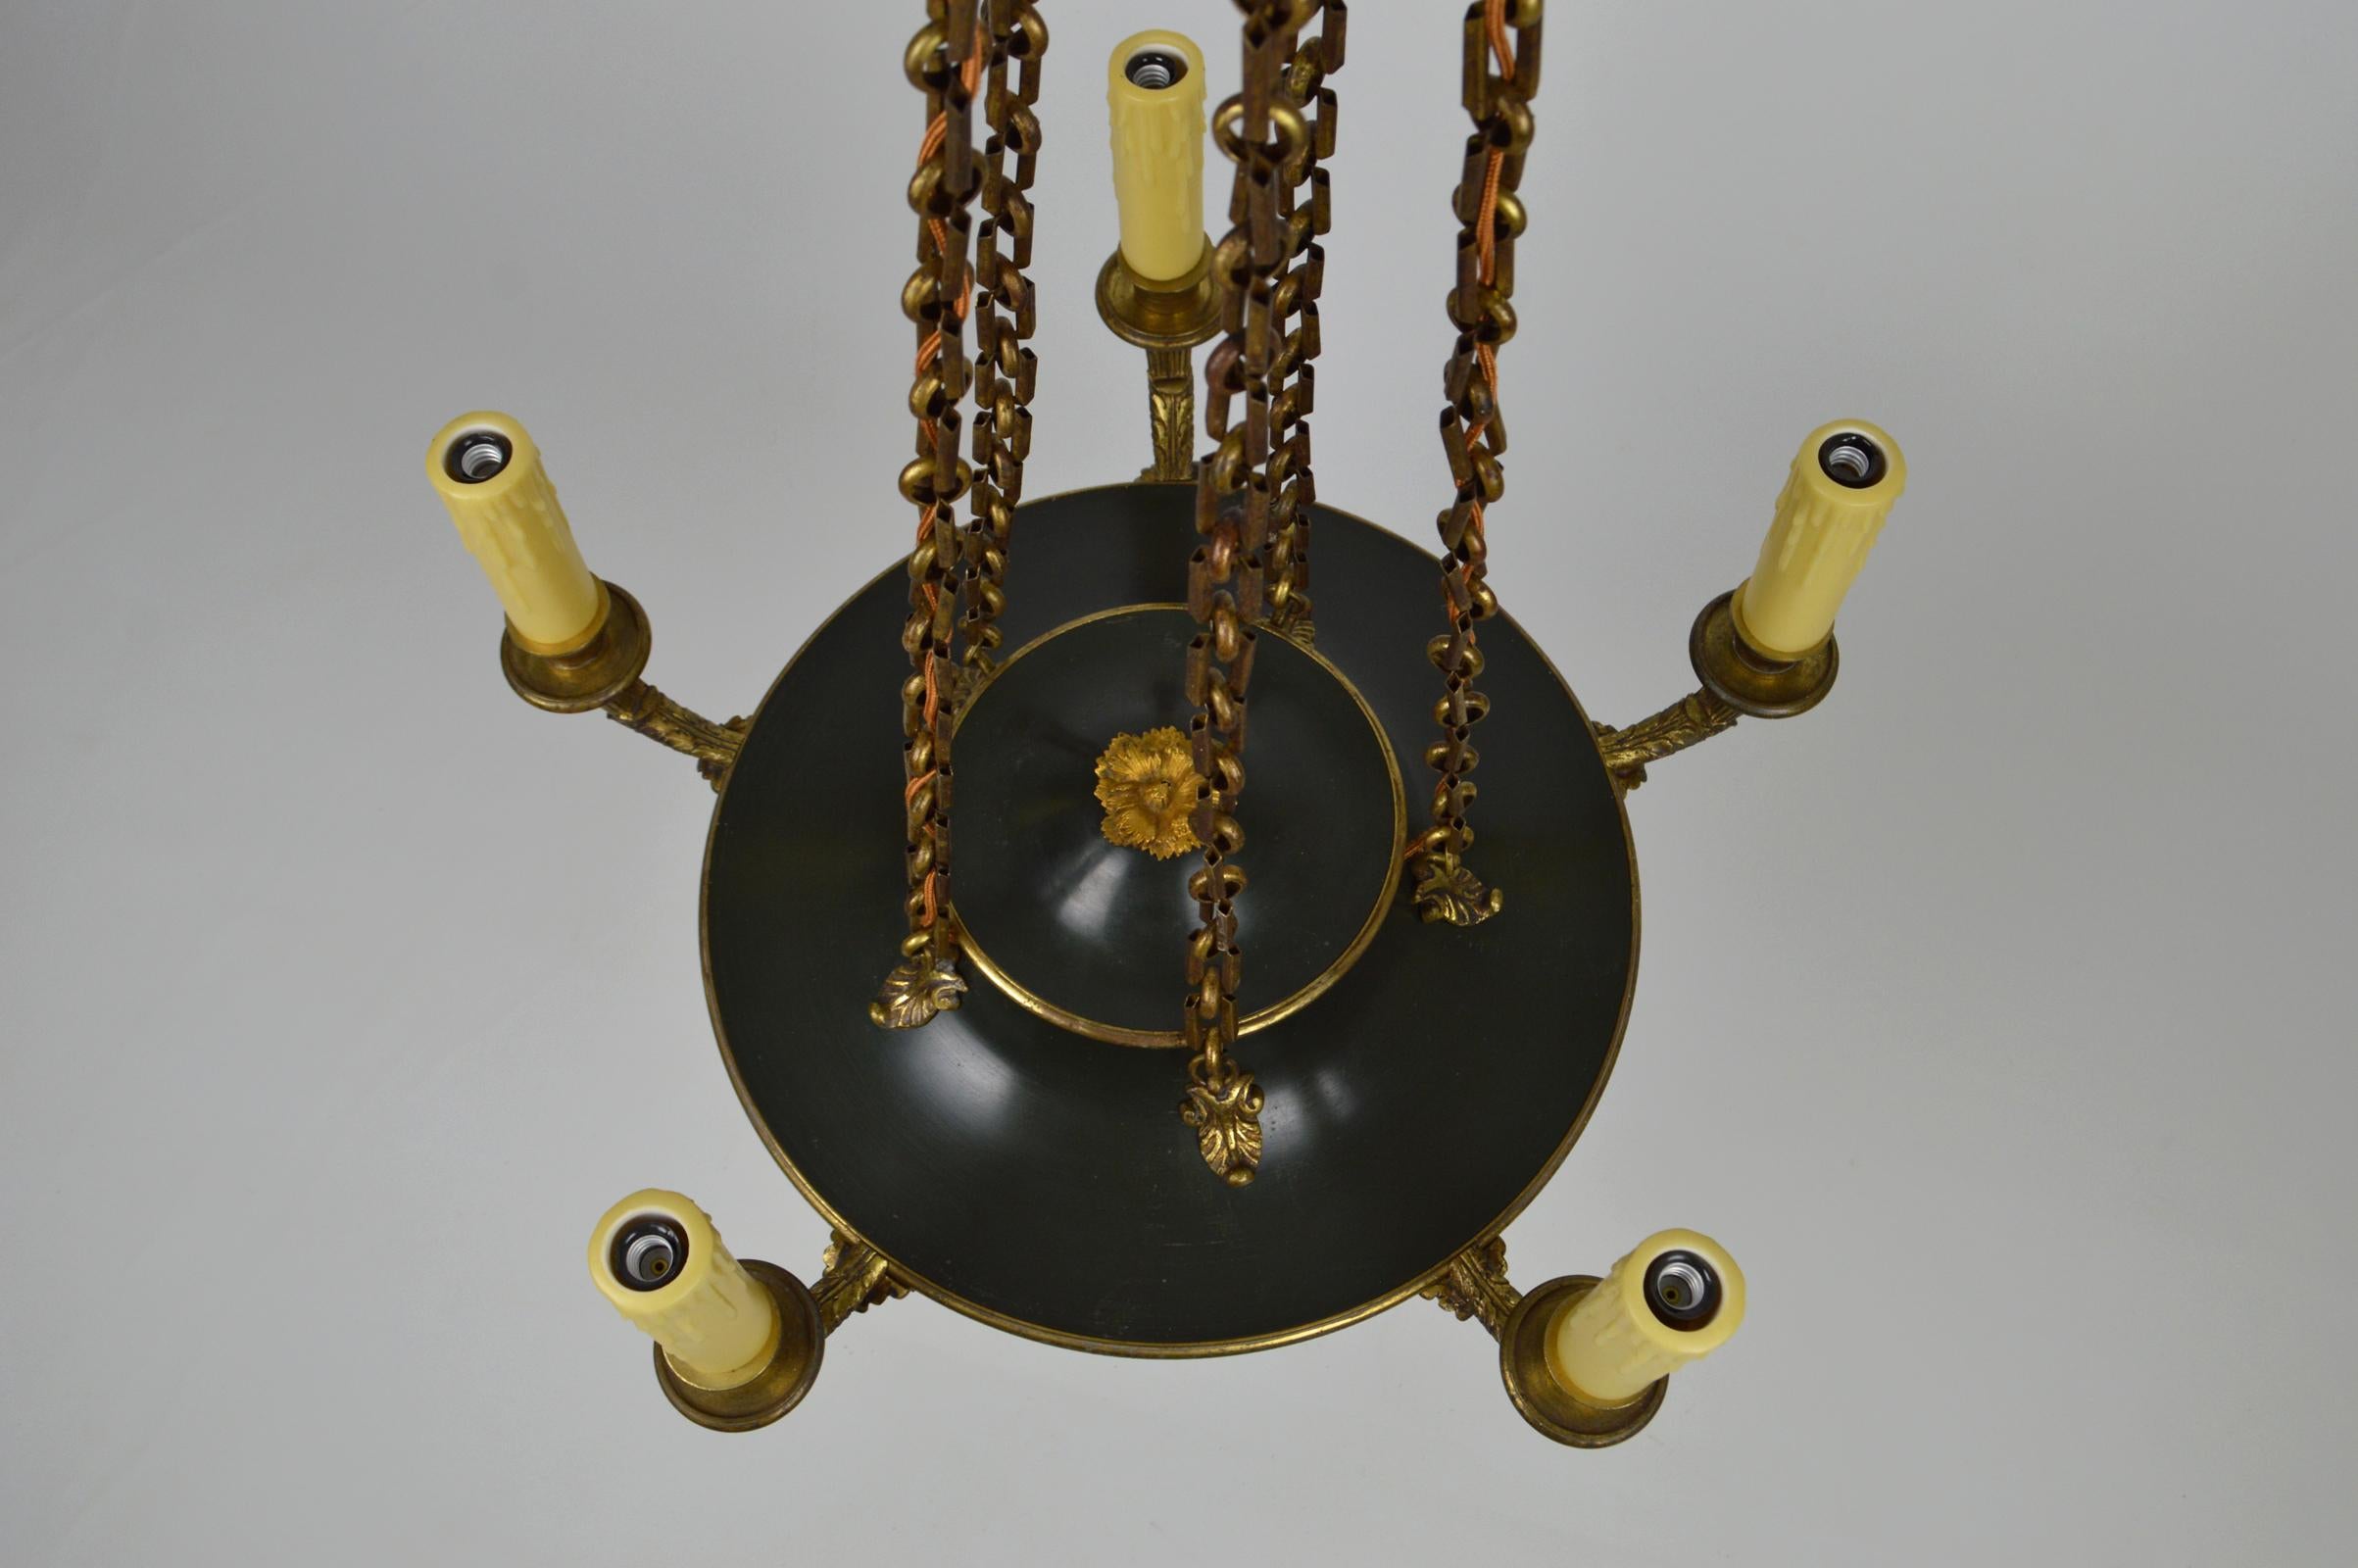 Antique French Empire Chandelier in Patinated Bronze, 19th Century For Sale 3